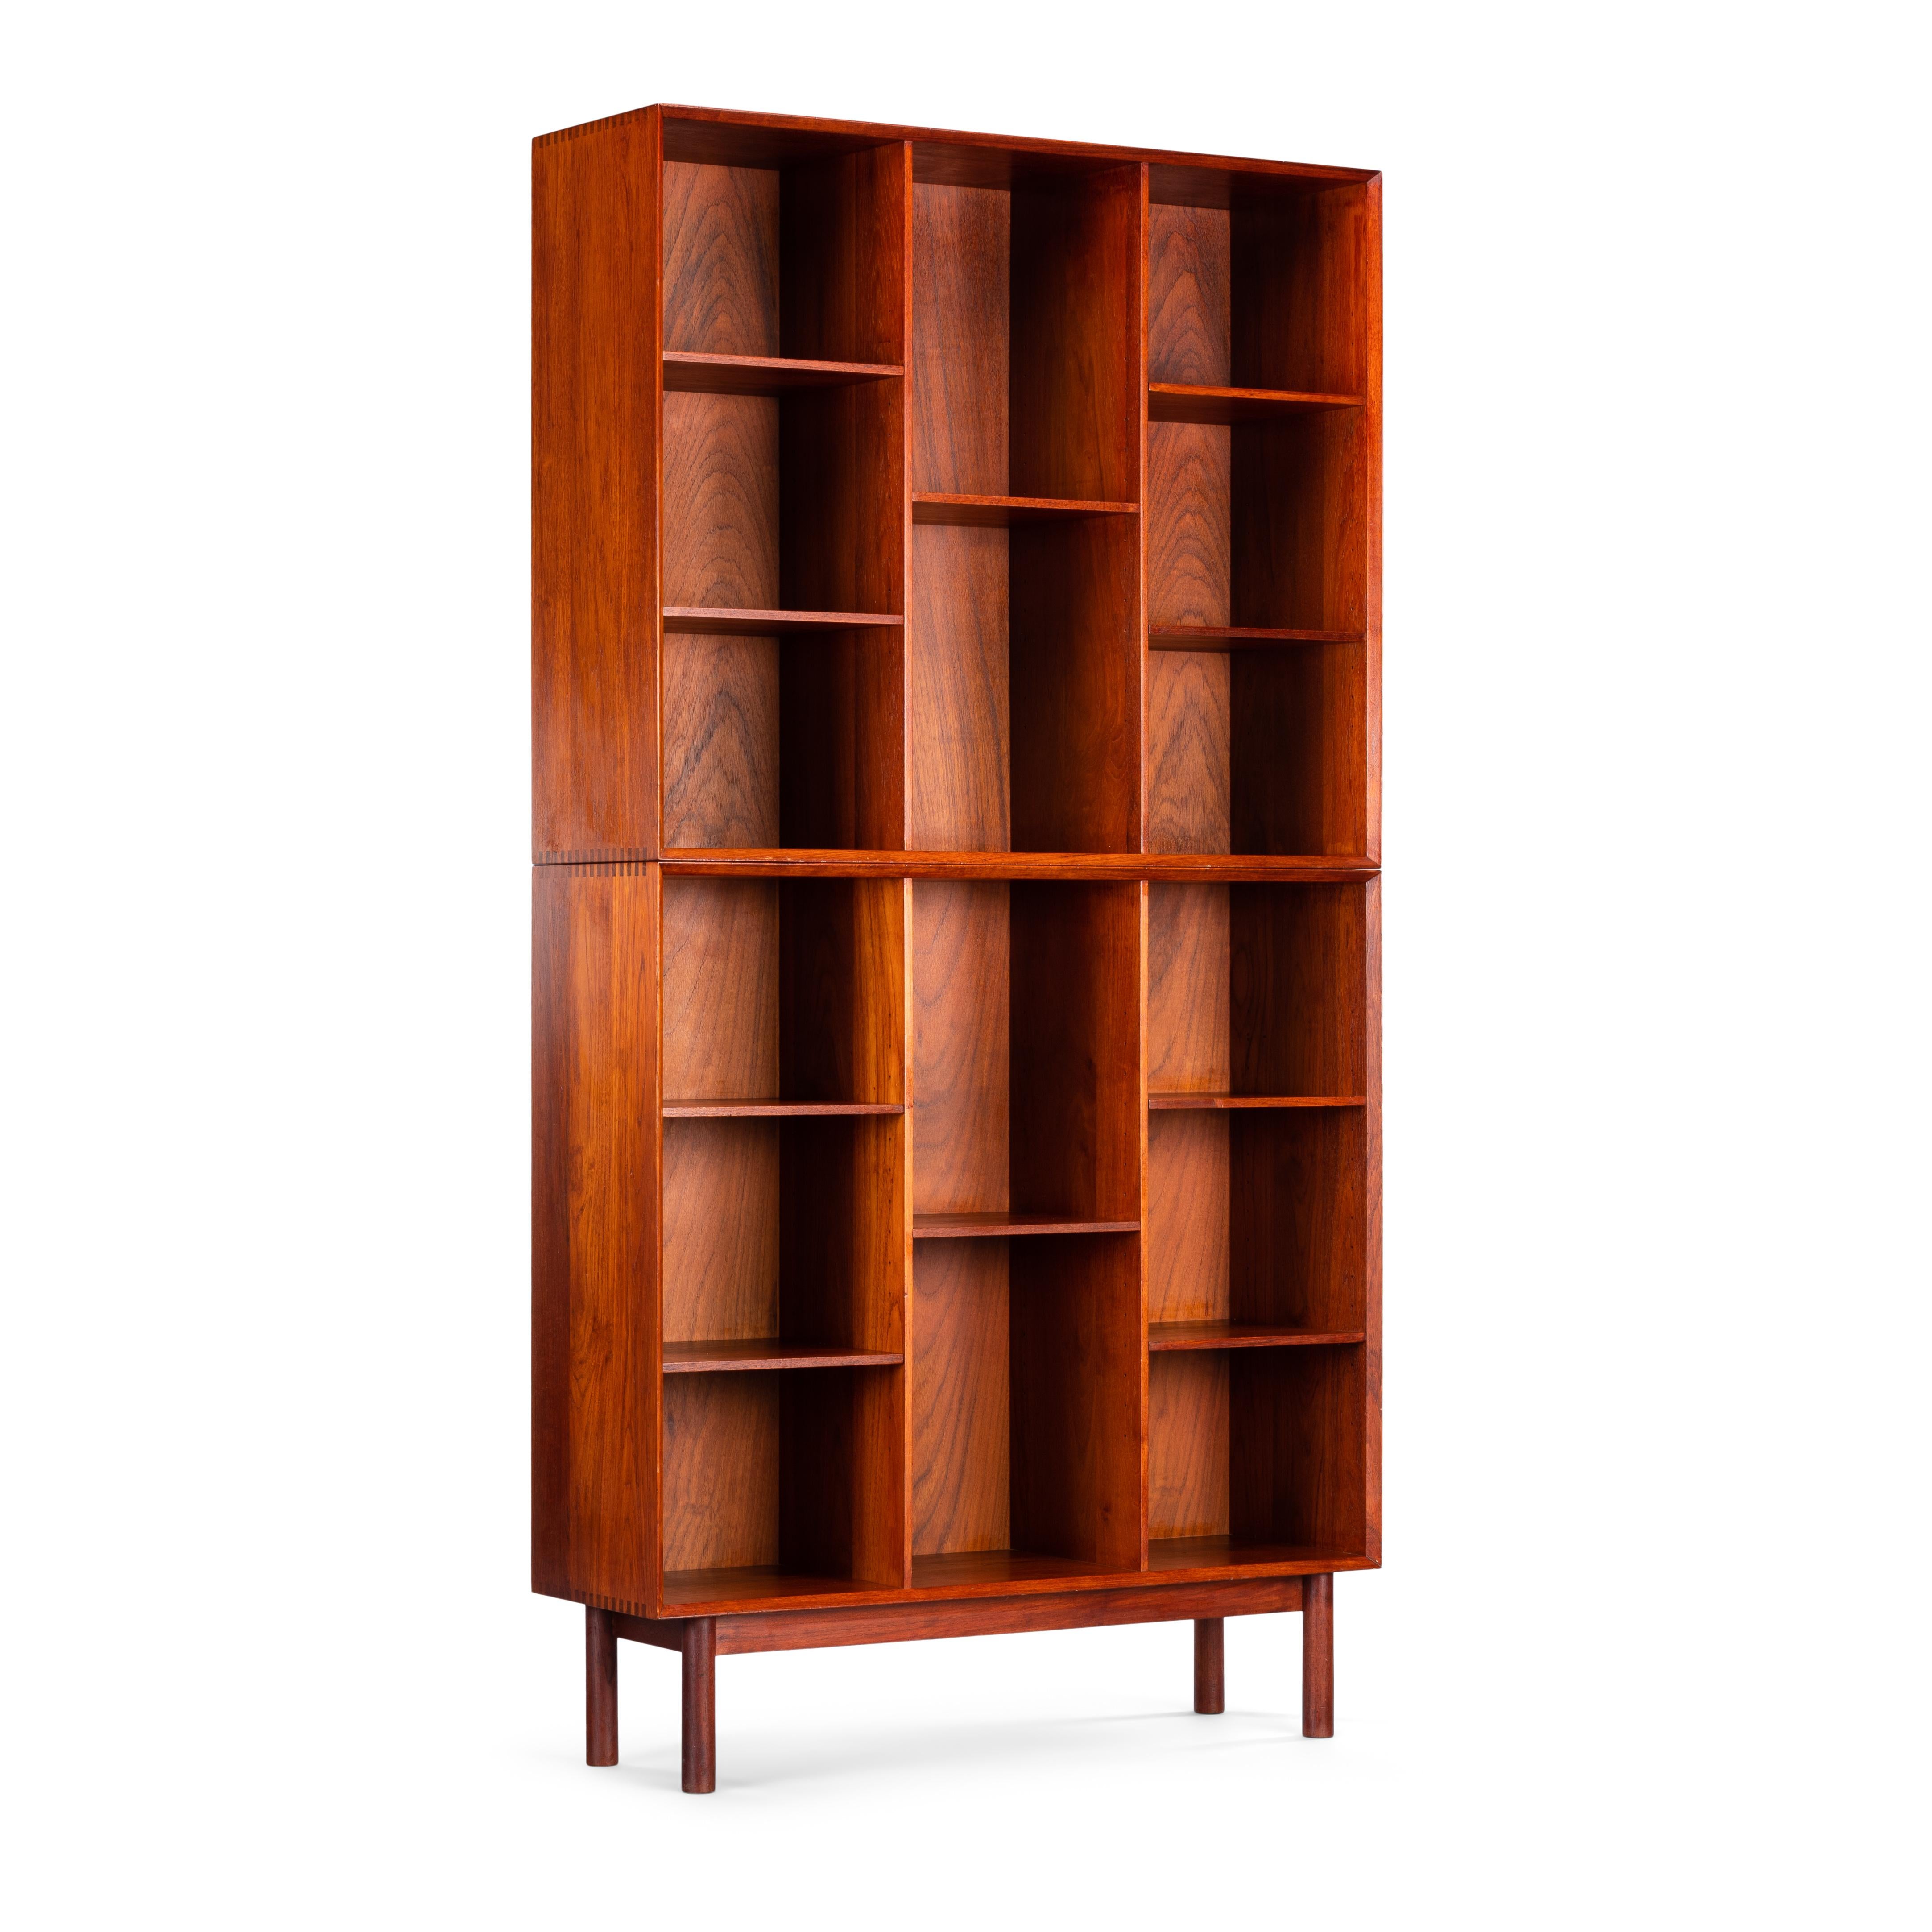 Fantastic two tear teak bookcase by Peter Hvidt and Orla Mølgaard for Soborg Møbler. This bookcase consists of a top and bottom case of equal dimensions. Each case has mitered edges, the 'can I have some please' finger joints and the fully